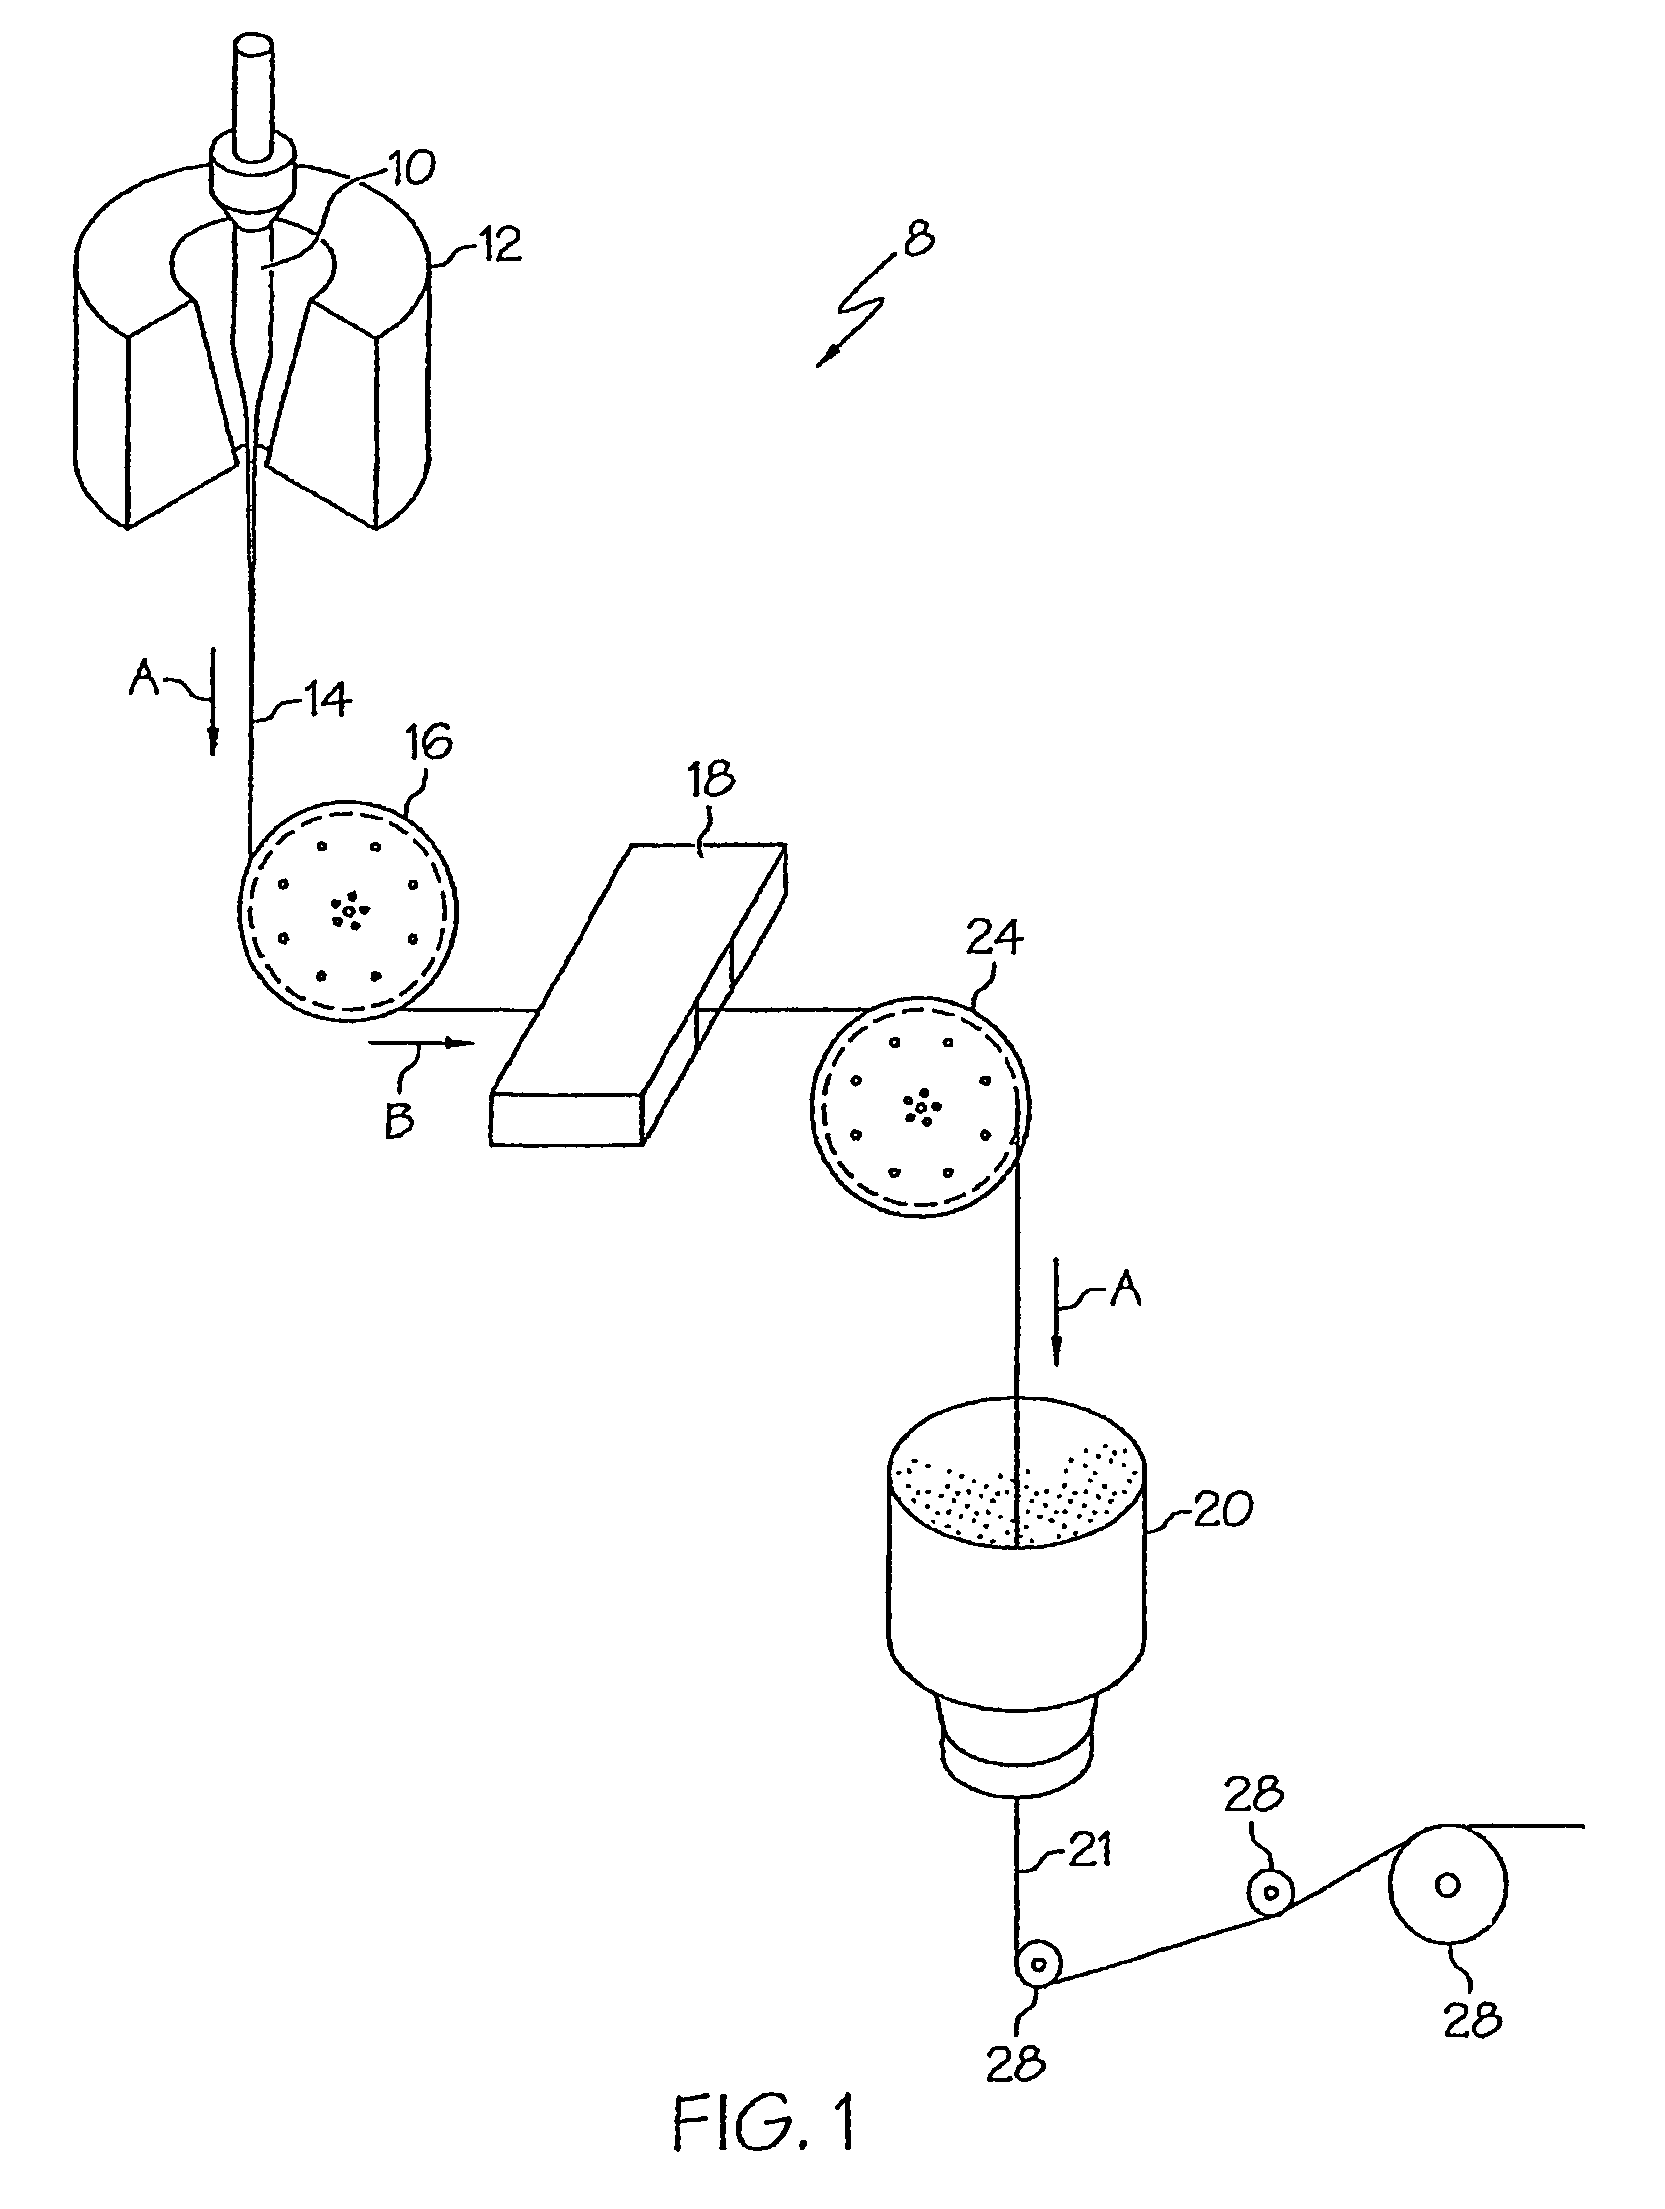 Methods for drawing optical fibers using a fluid bearing